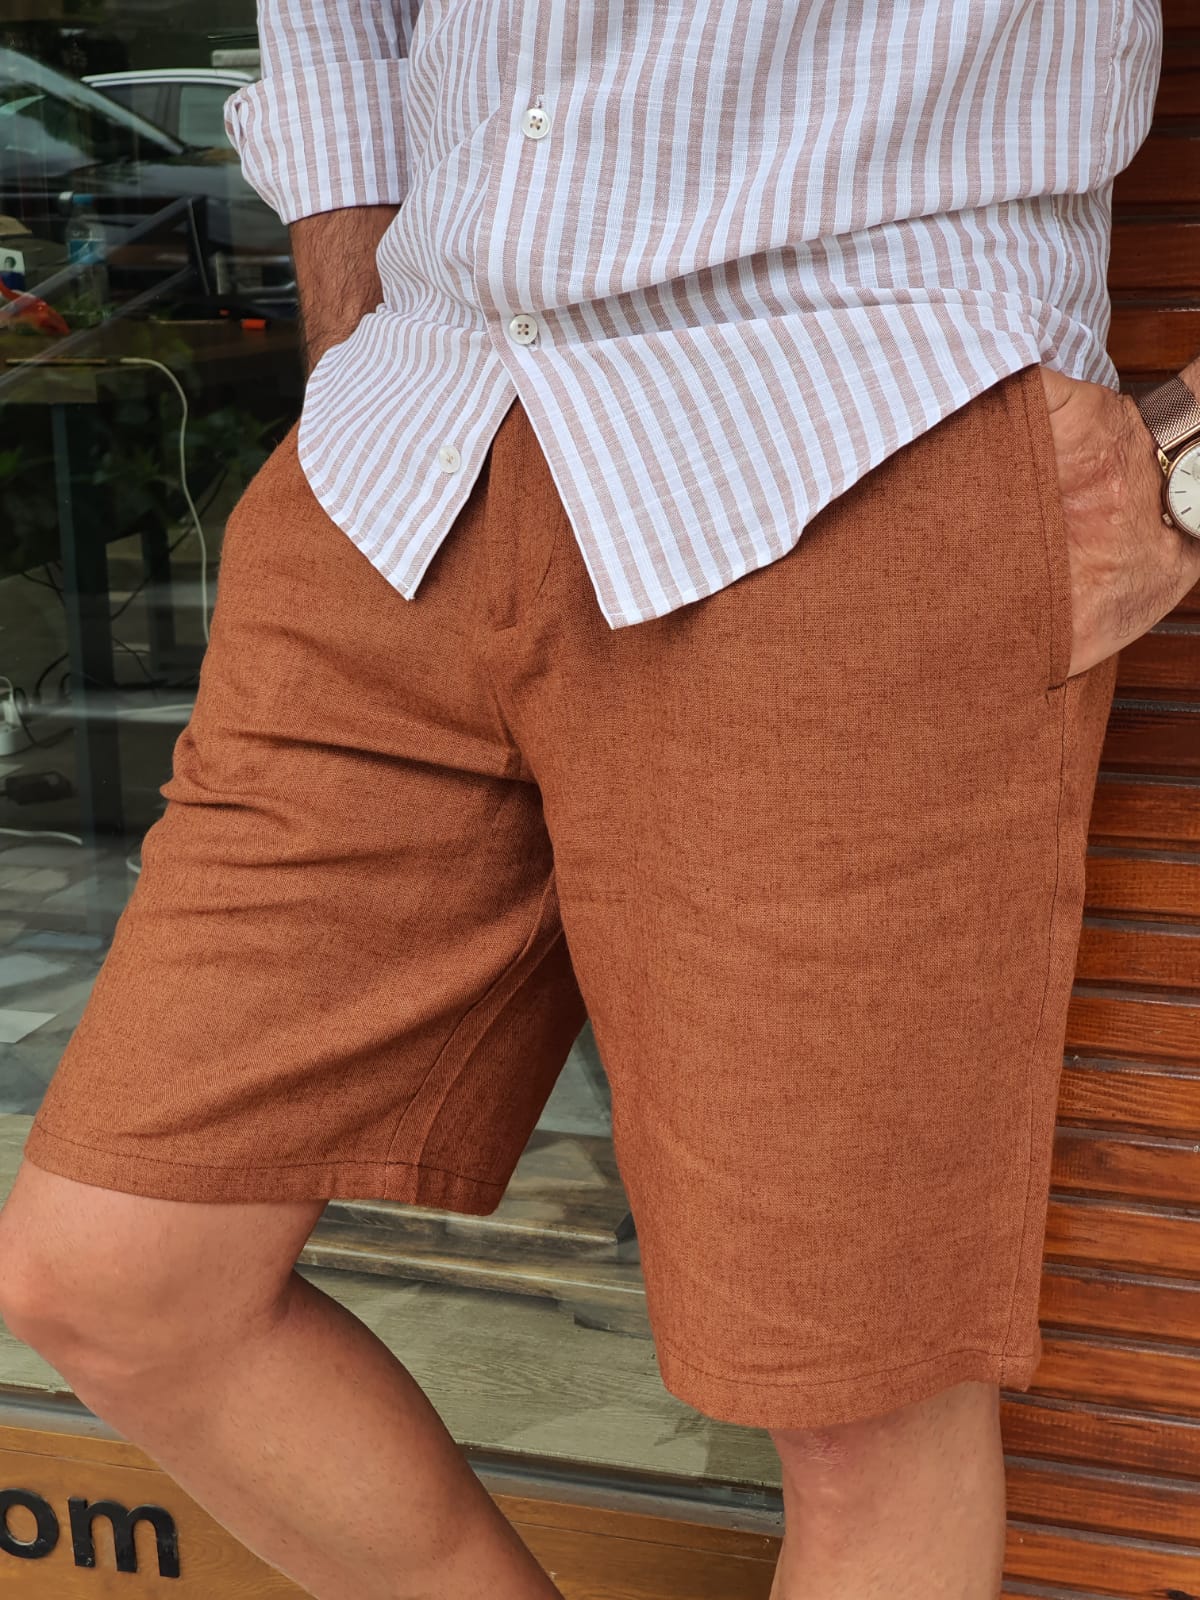 BROWN SLIM-FIT SPECIAL EDITION* LINEN SHORTS